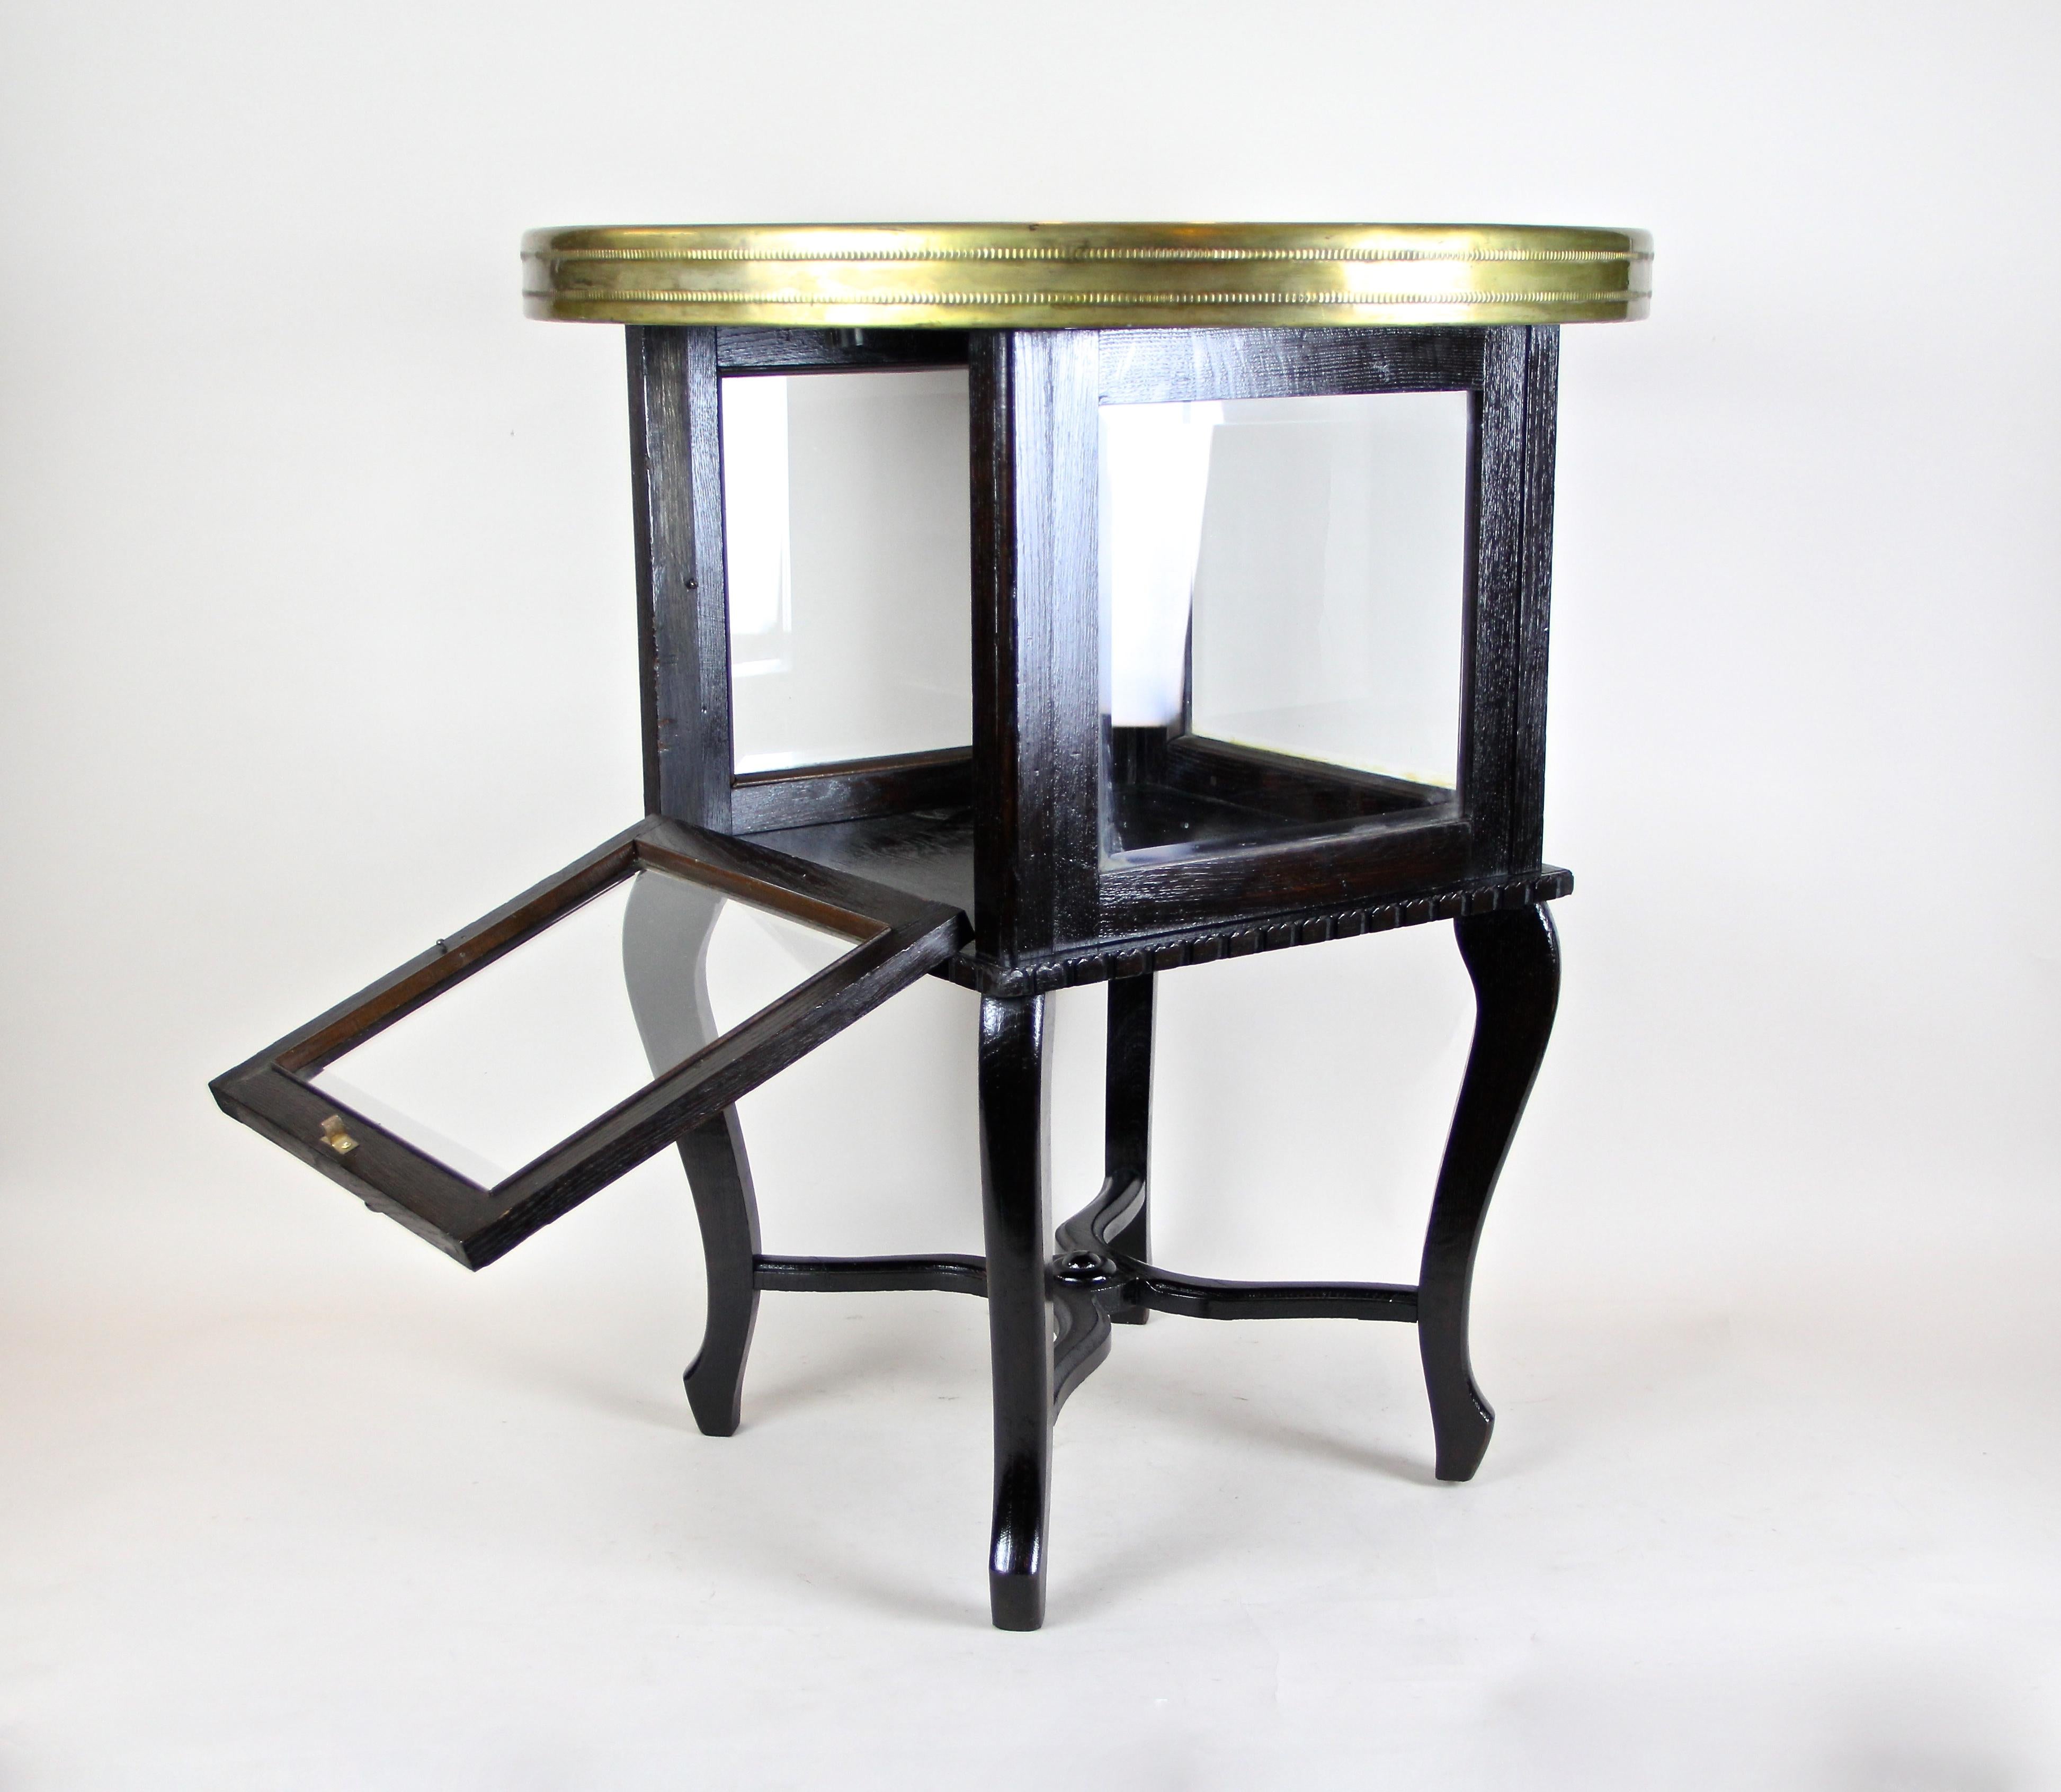 Glass Art Deco Side Table with Ornamented Brass Table Top, Austria, circa 1920